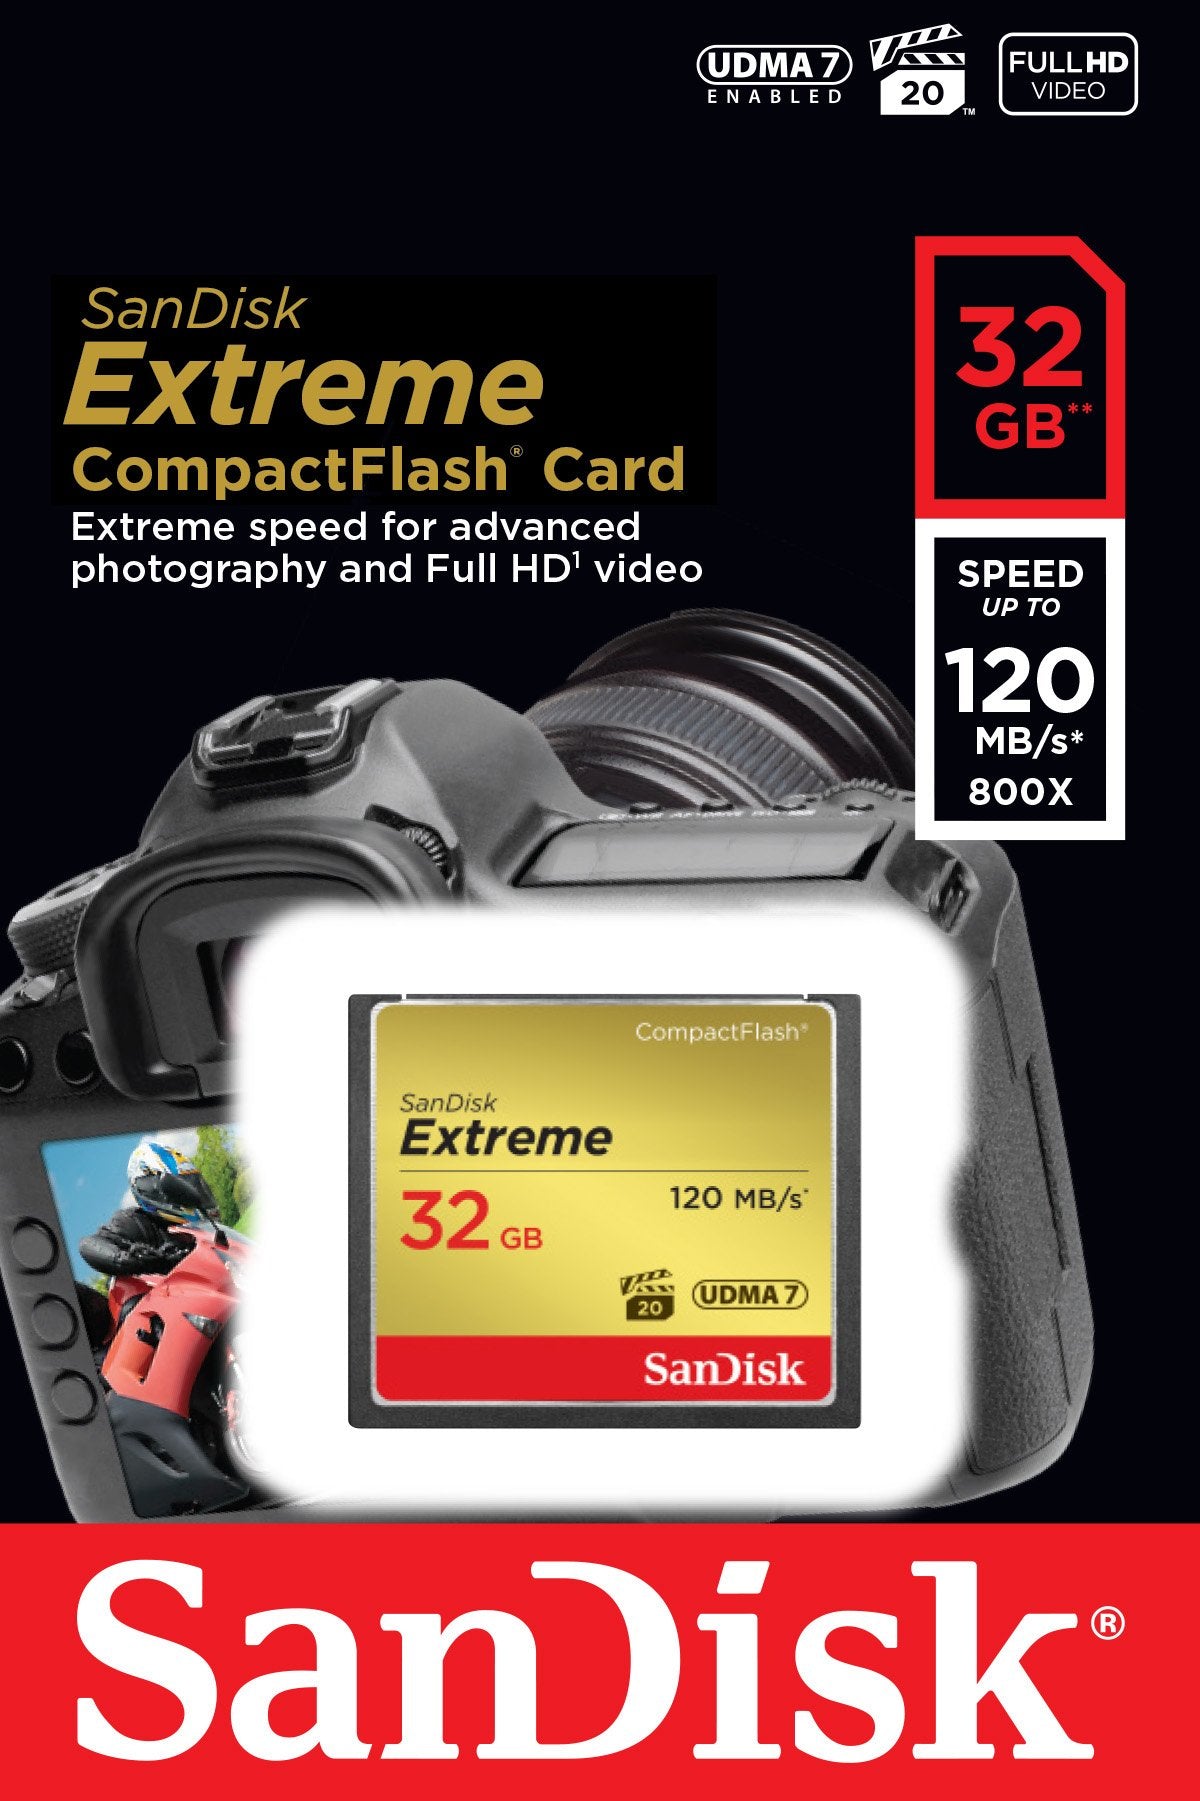 SanDisk Extreme 32GB Compact Flash Memory Card UDMA 7 Speed Up To 120MB/s- SDCFXS-032G-X46